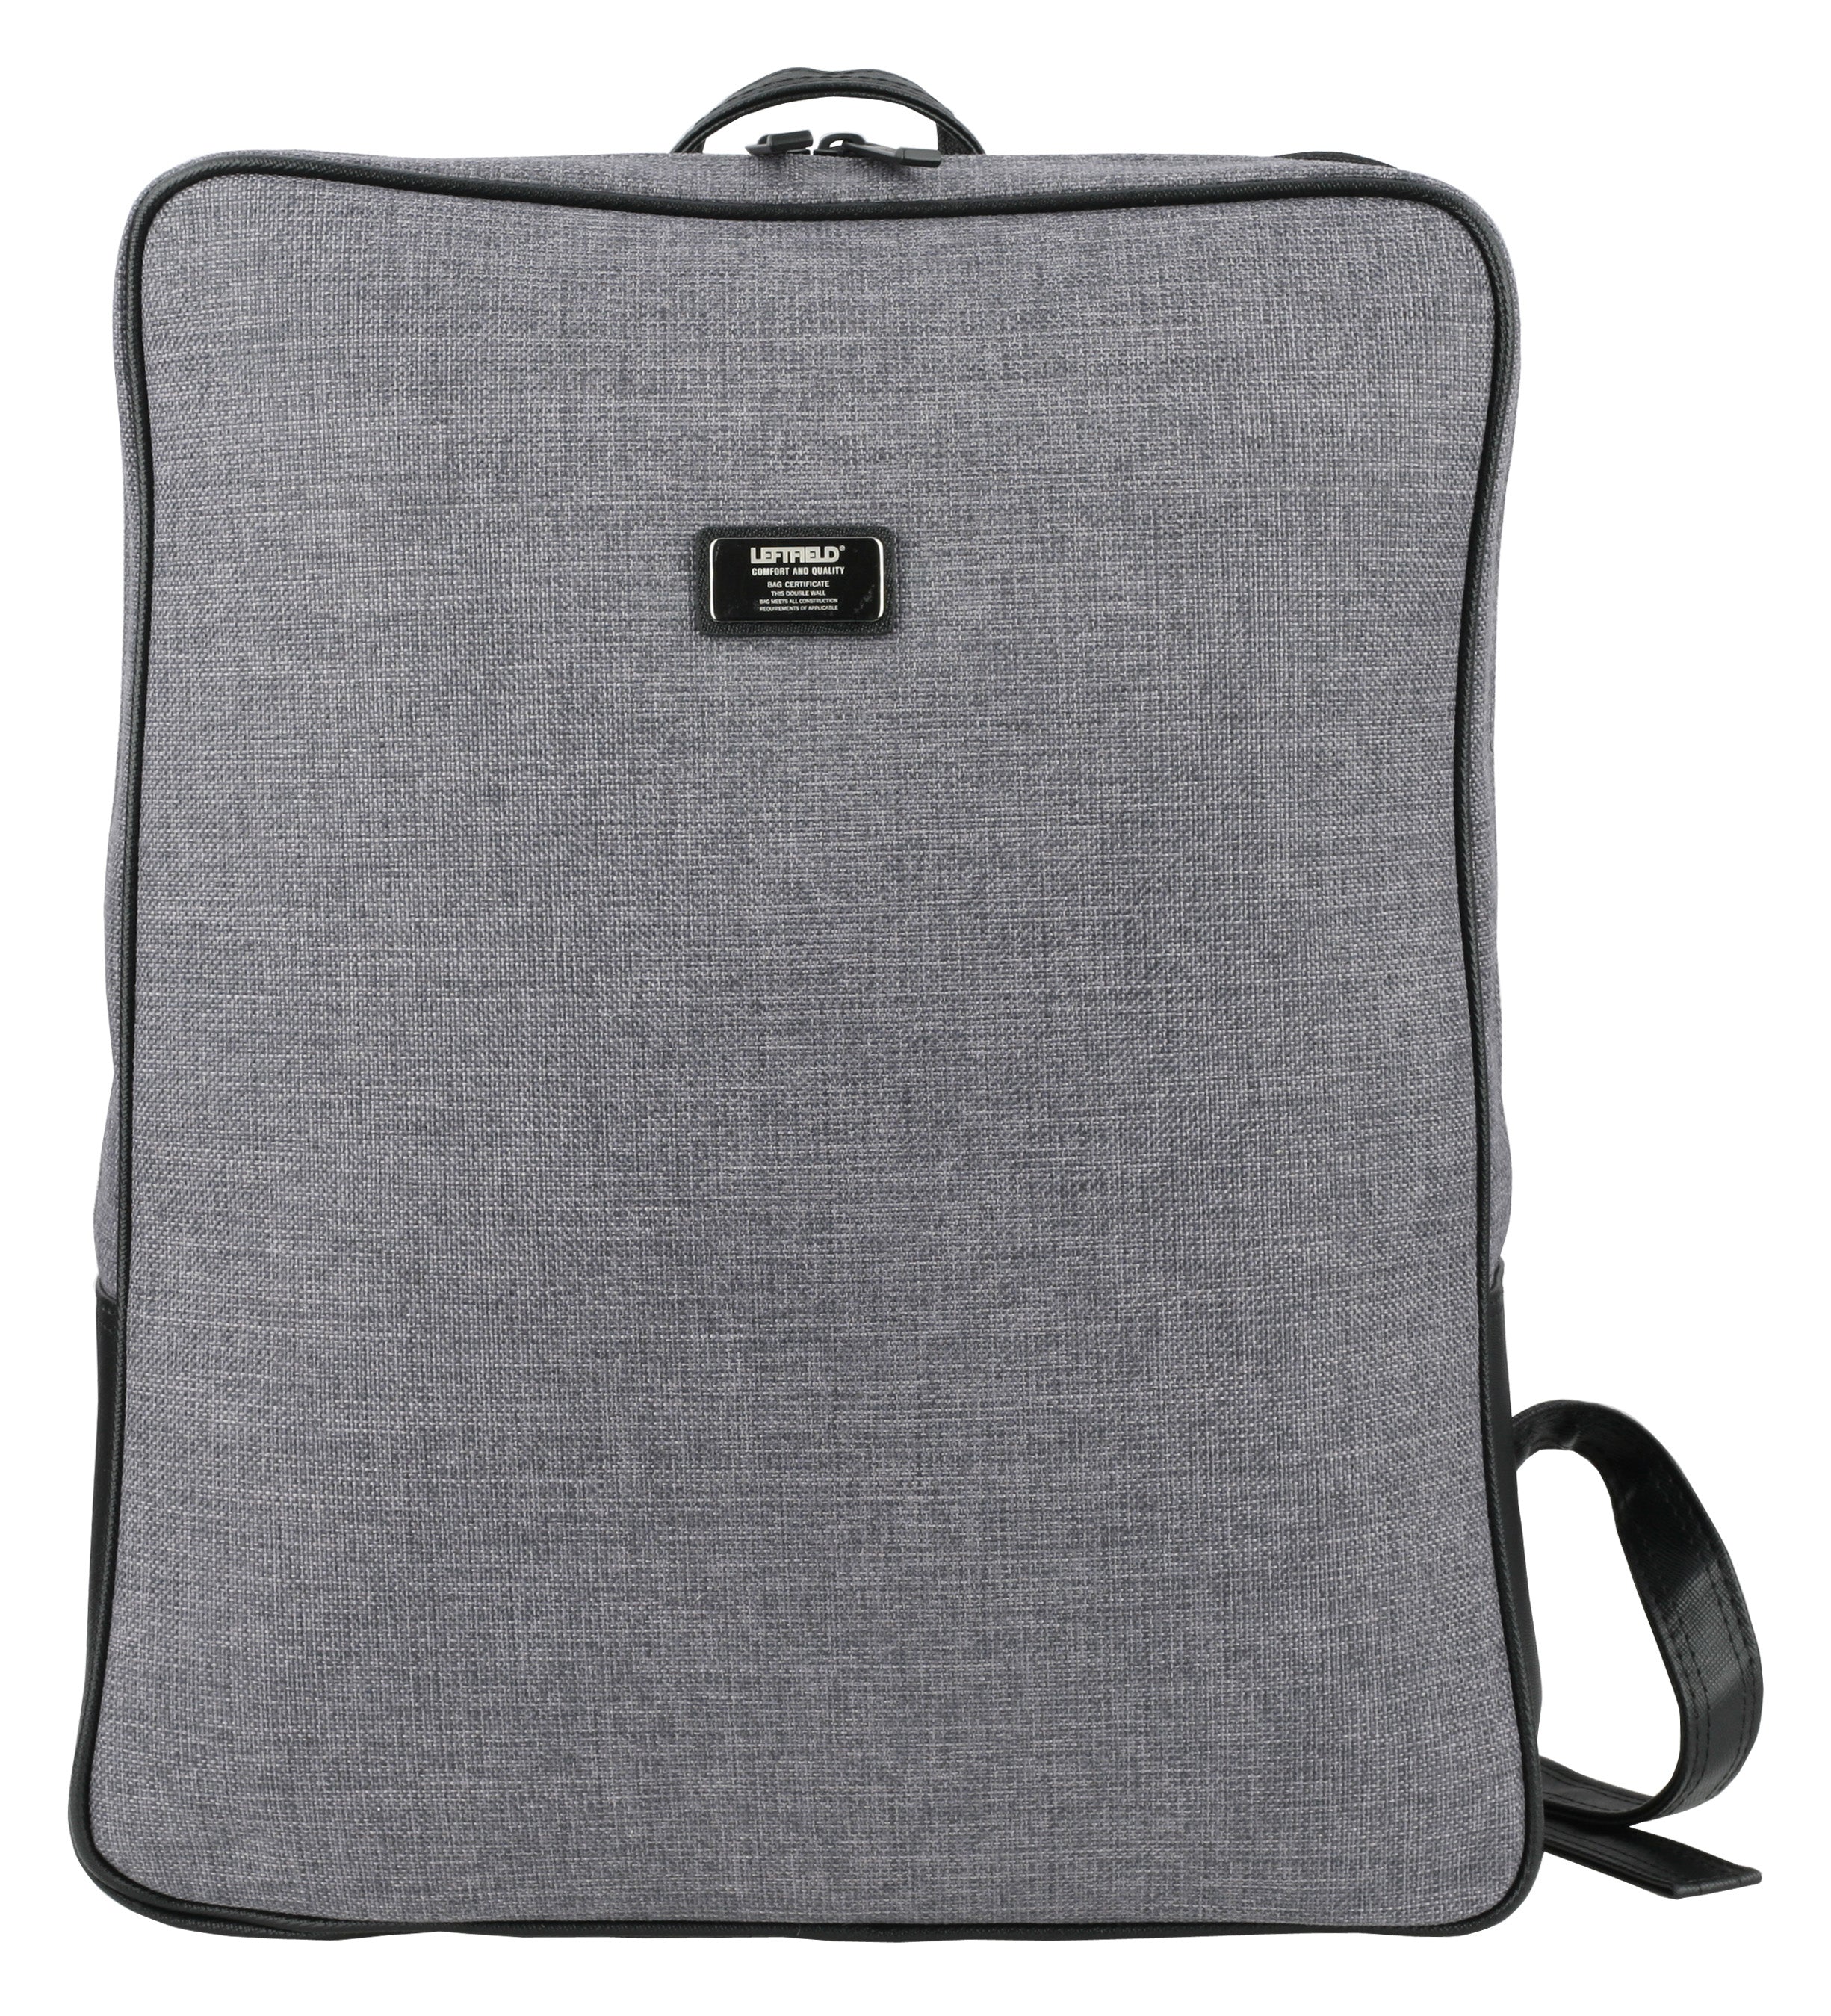 Gray Square Canvas Laptop School Book Business Backpacks